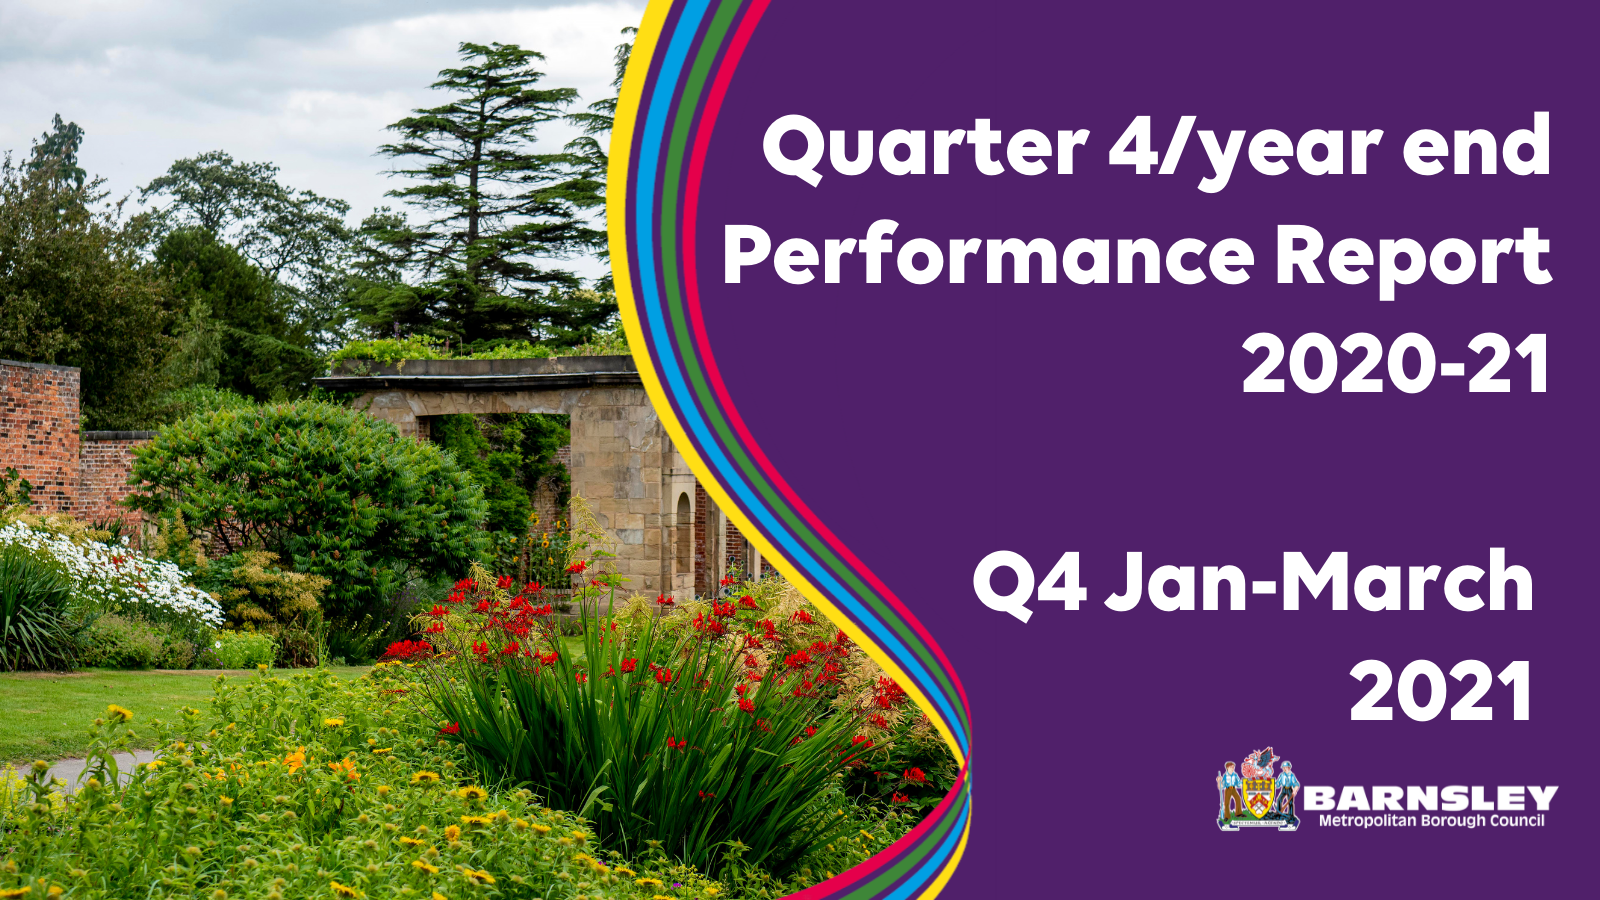 Quarter 4/year end Performance Report 2020-2021. Q4 Jan-March 2021